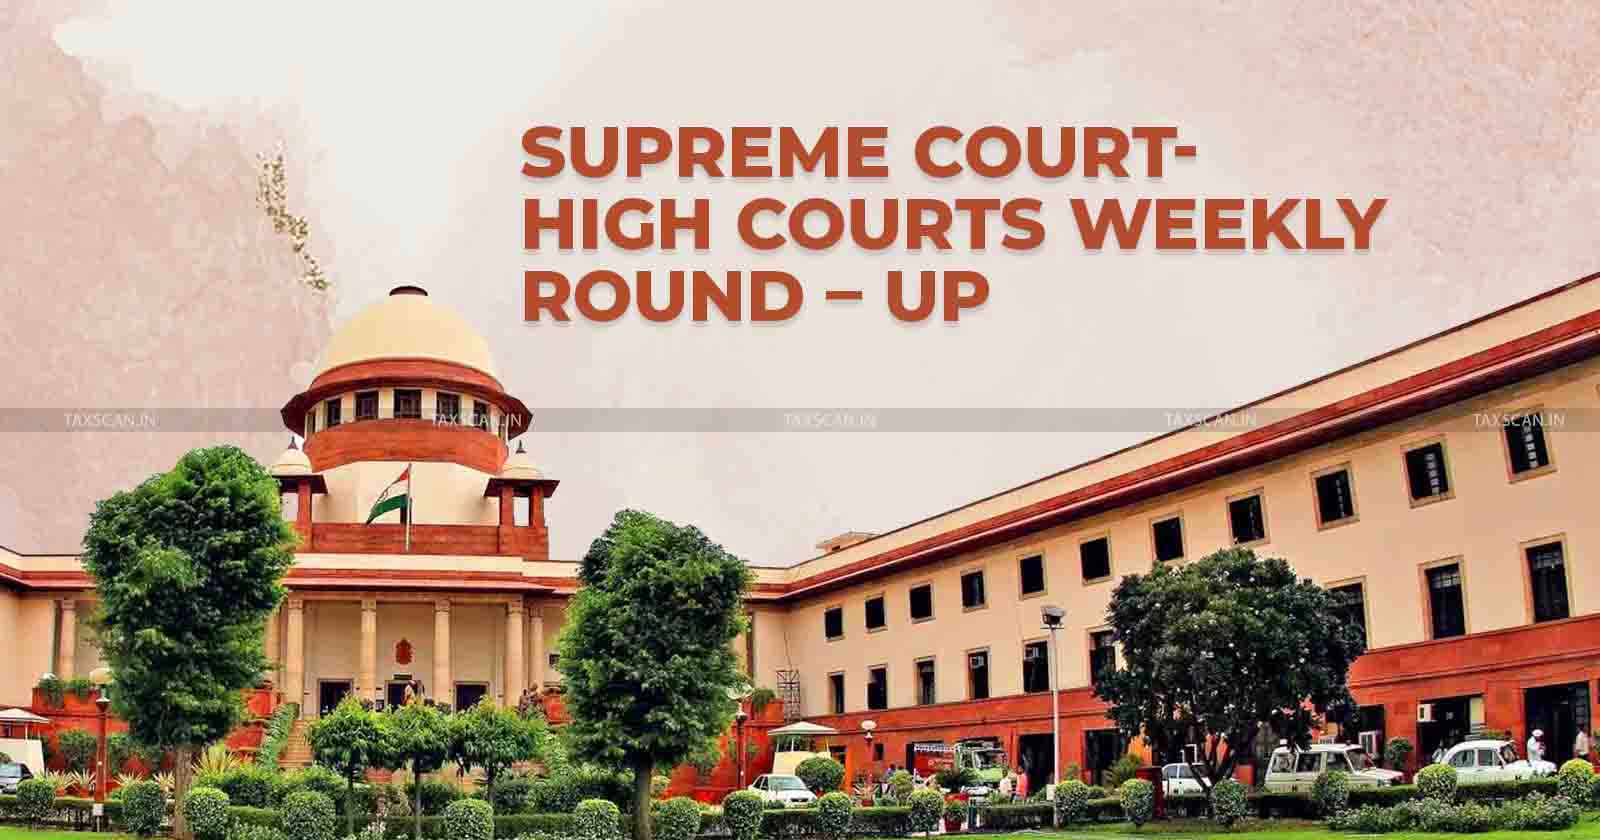 Supreme Court and High Court Weekly Round-Up - Supreme Court and High Court - Supreme Court - taxscan